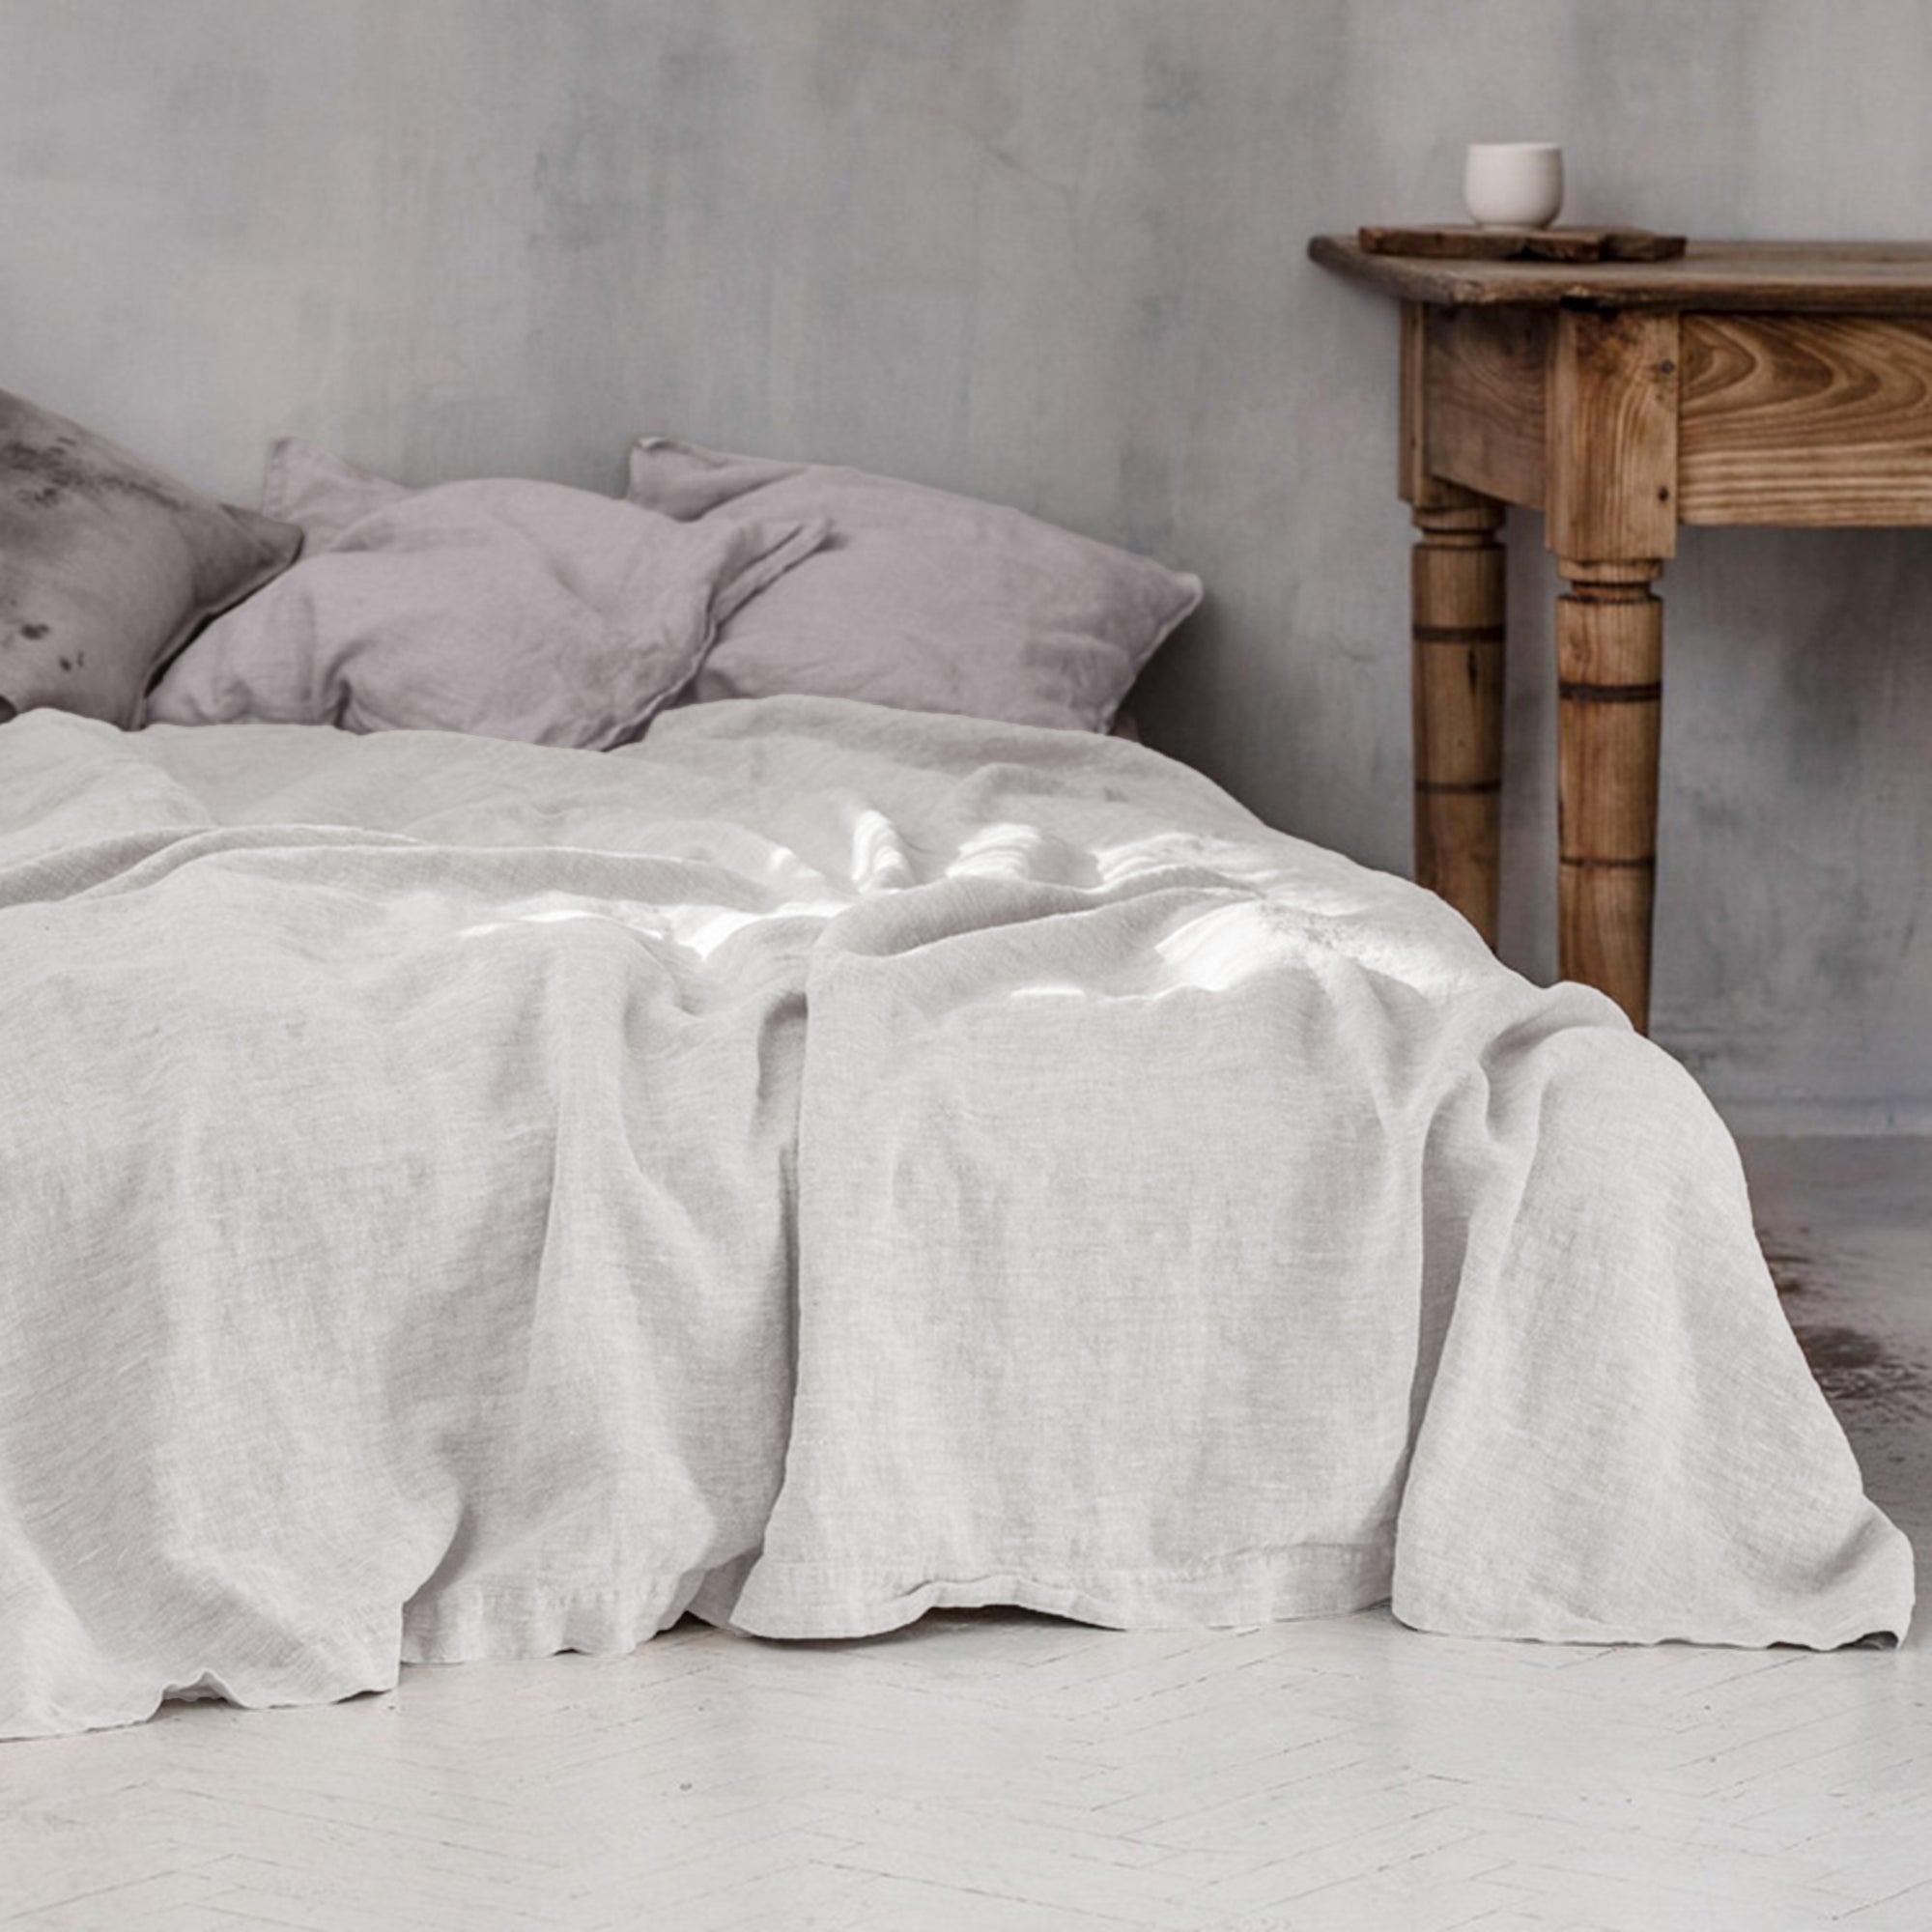 Comfort-Washed French Flax Linen Bedding Set